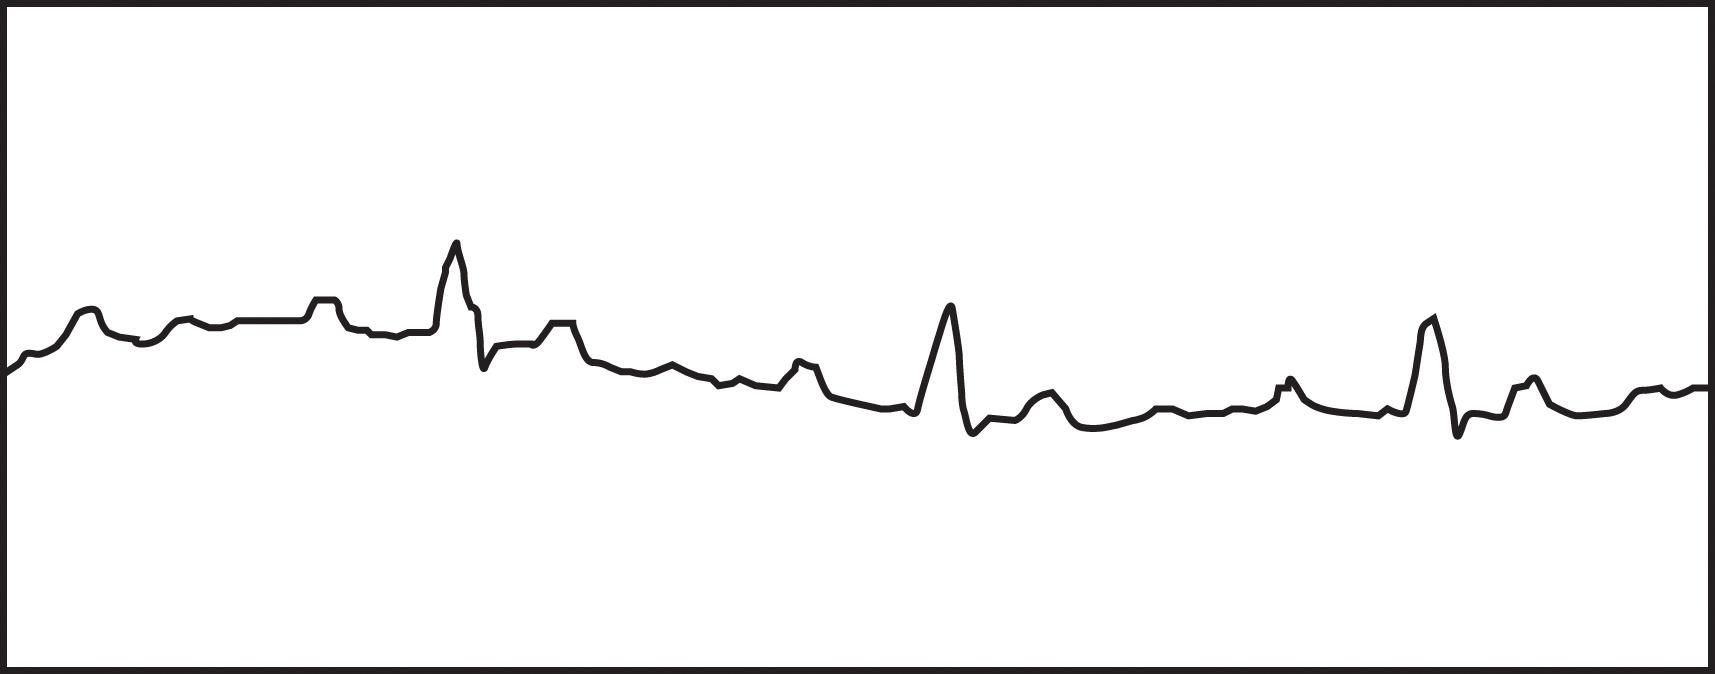 FIGURE 2, Rhythm strip shows atrial P waves and ventricular QRS complexes occurring at different rates and with no relationship between them, which is characteristic of third-degree atrioventricular block.